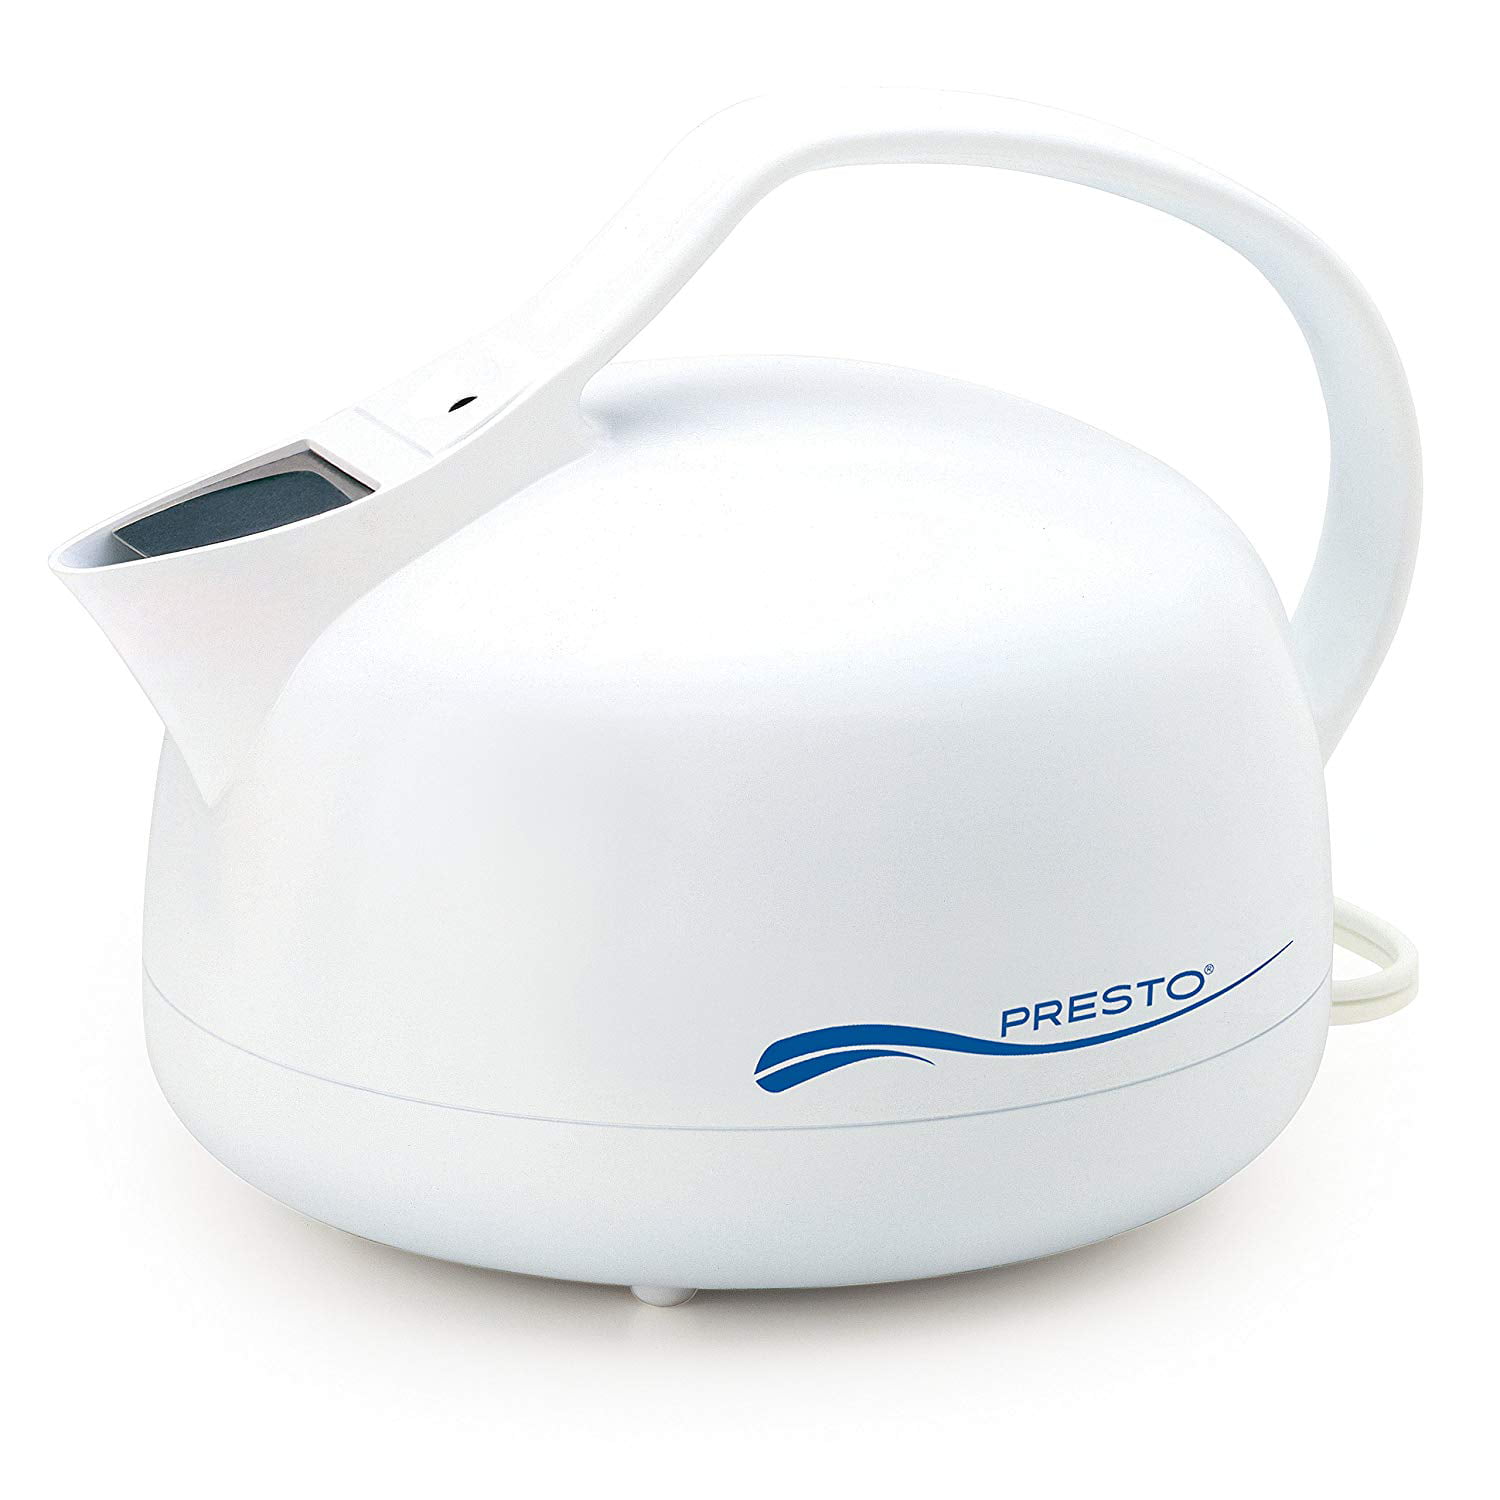 electric whistling kettle